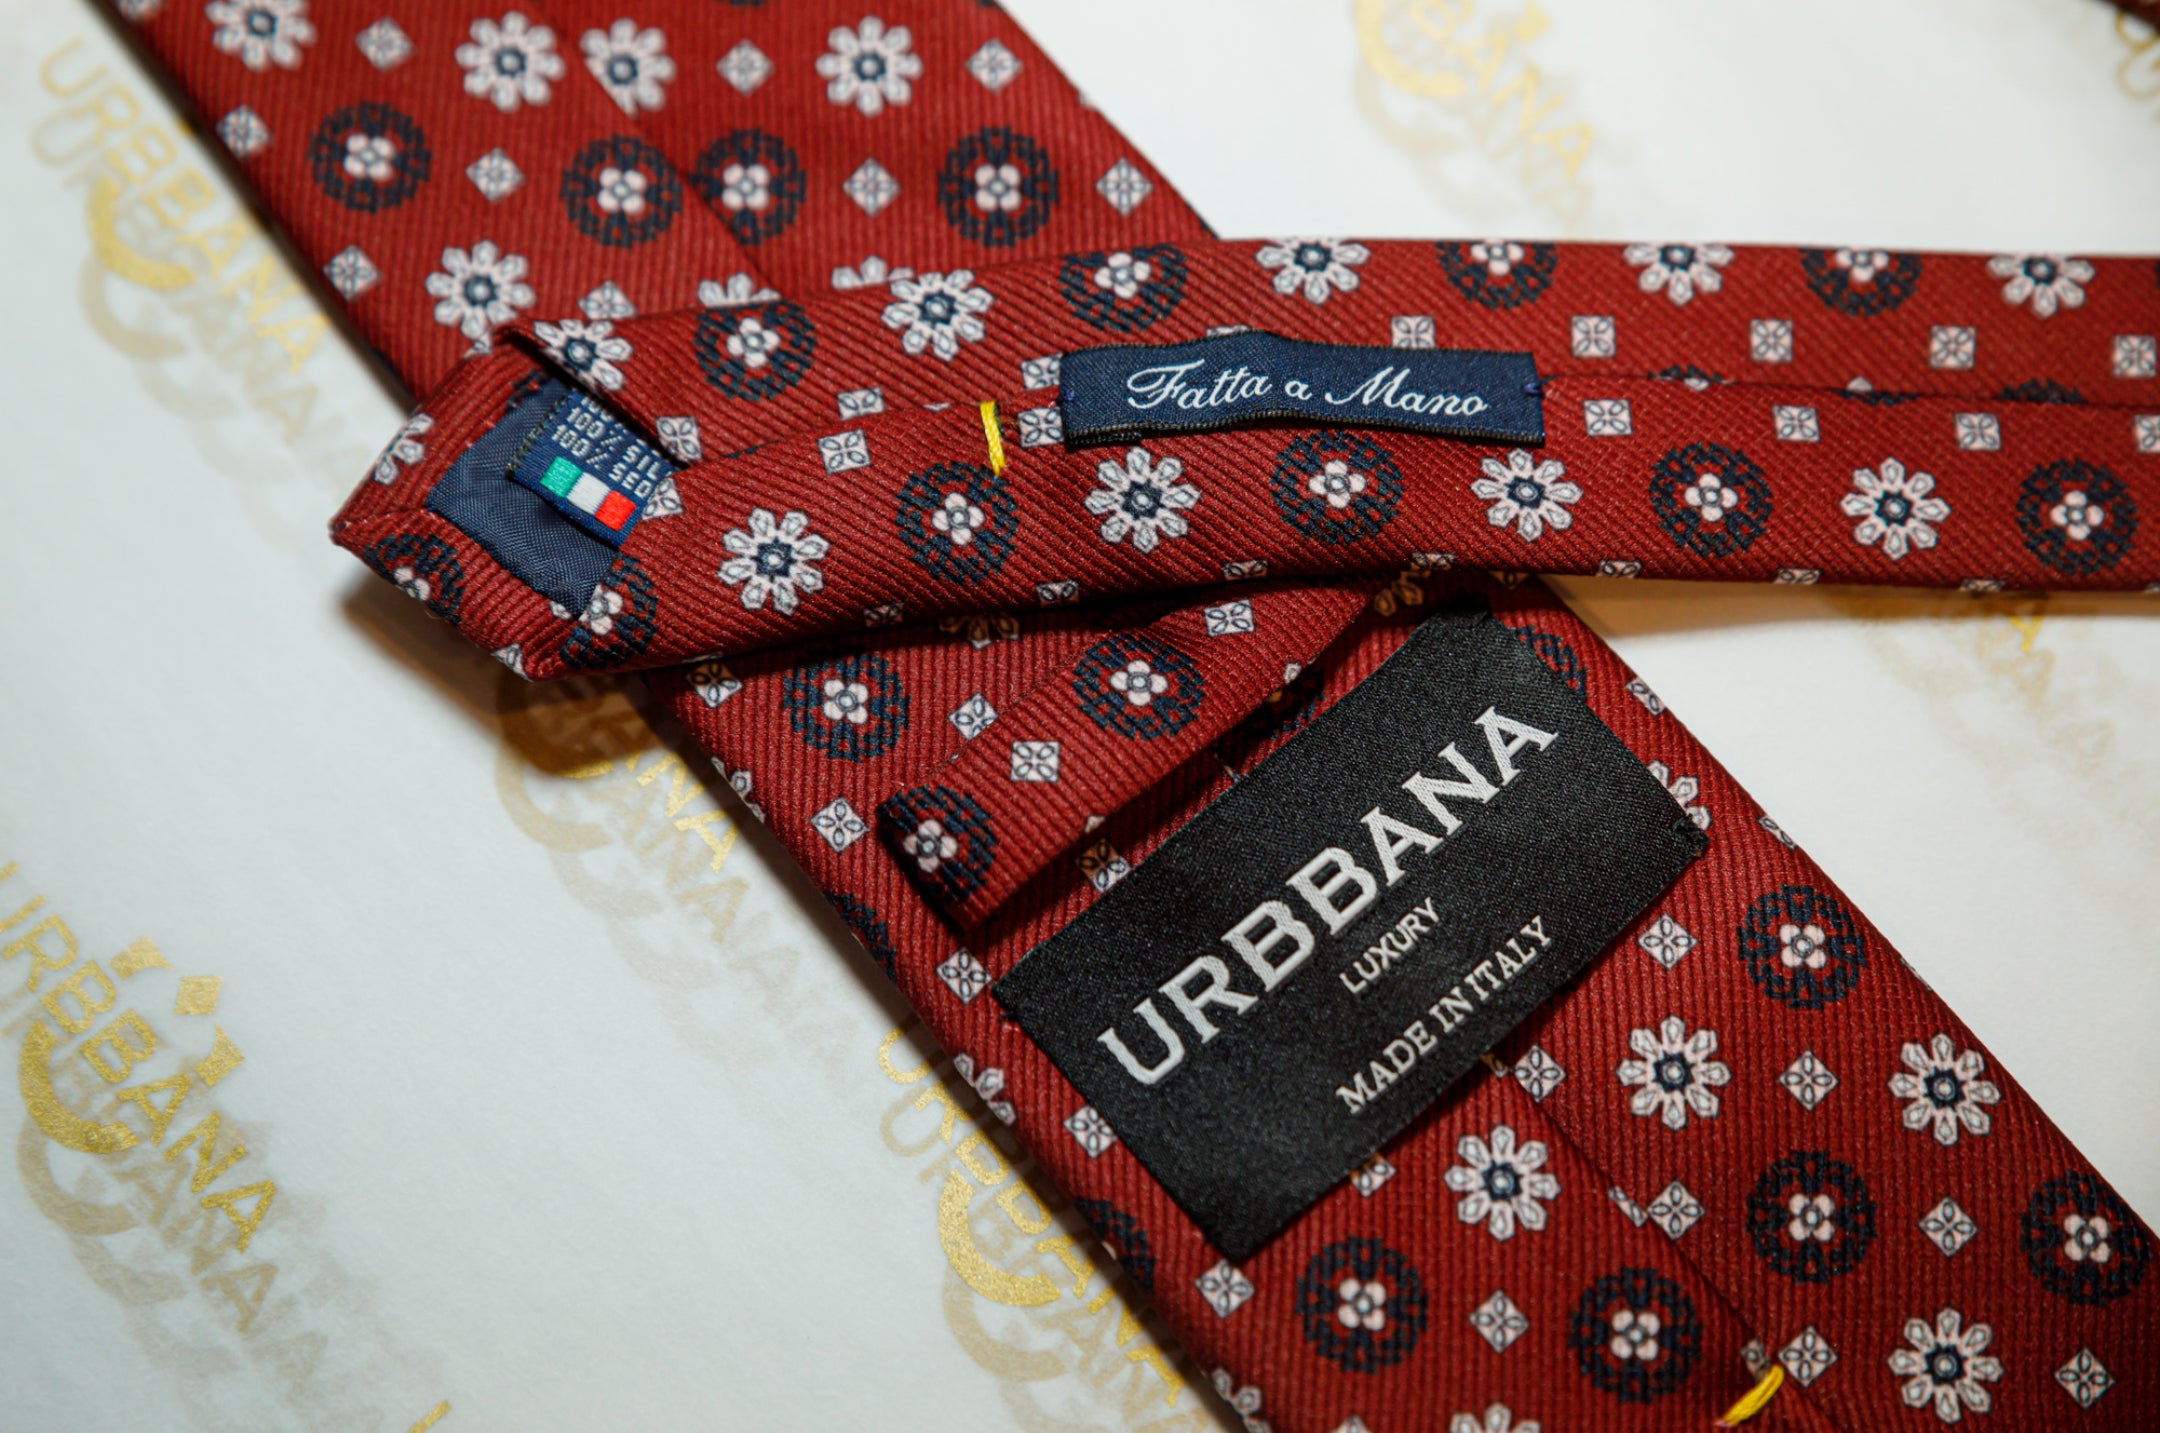 The Hu Silk Tie - Made in Italy